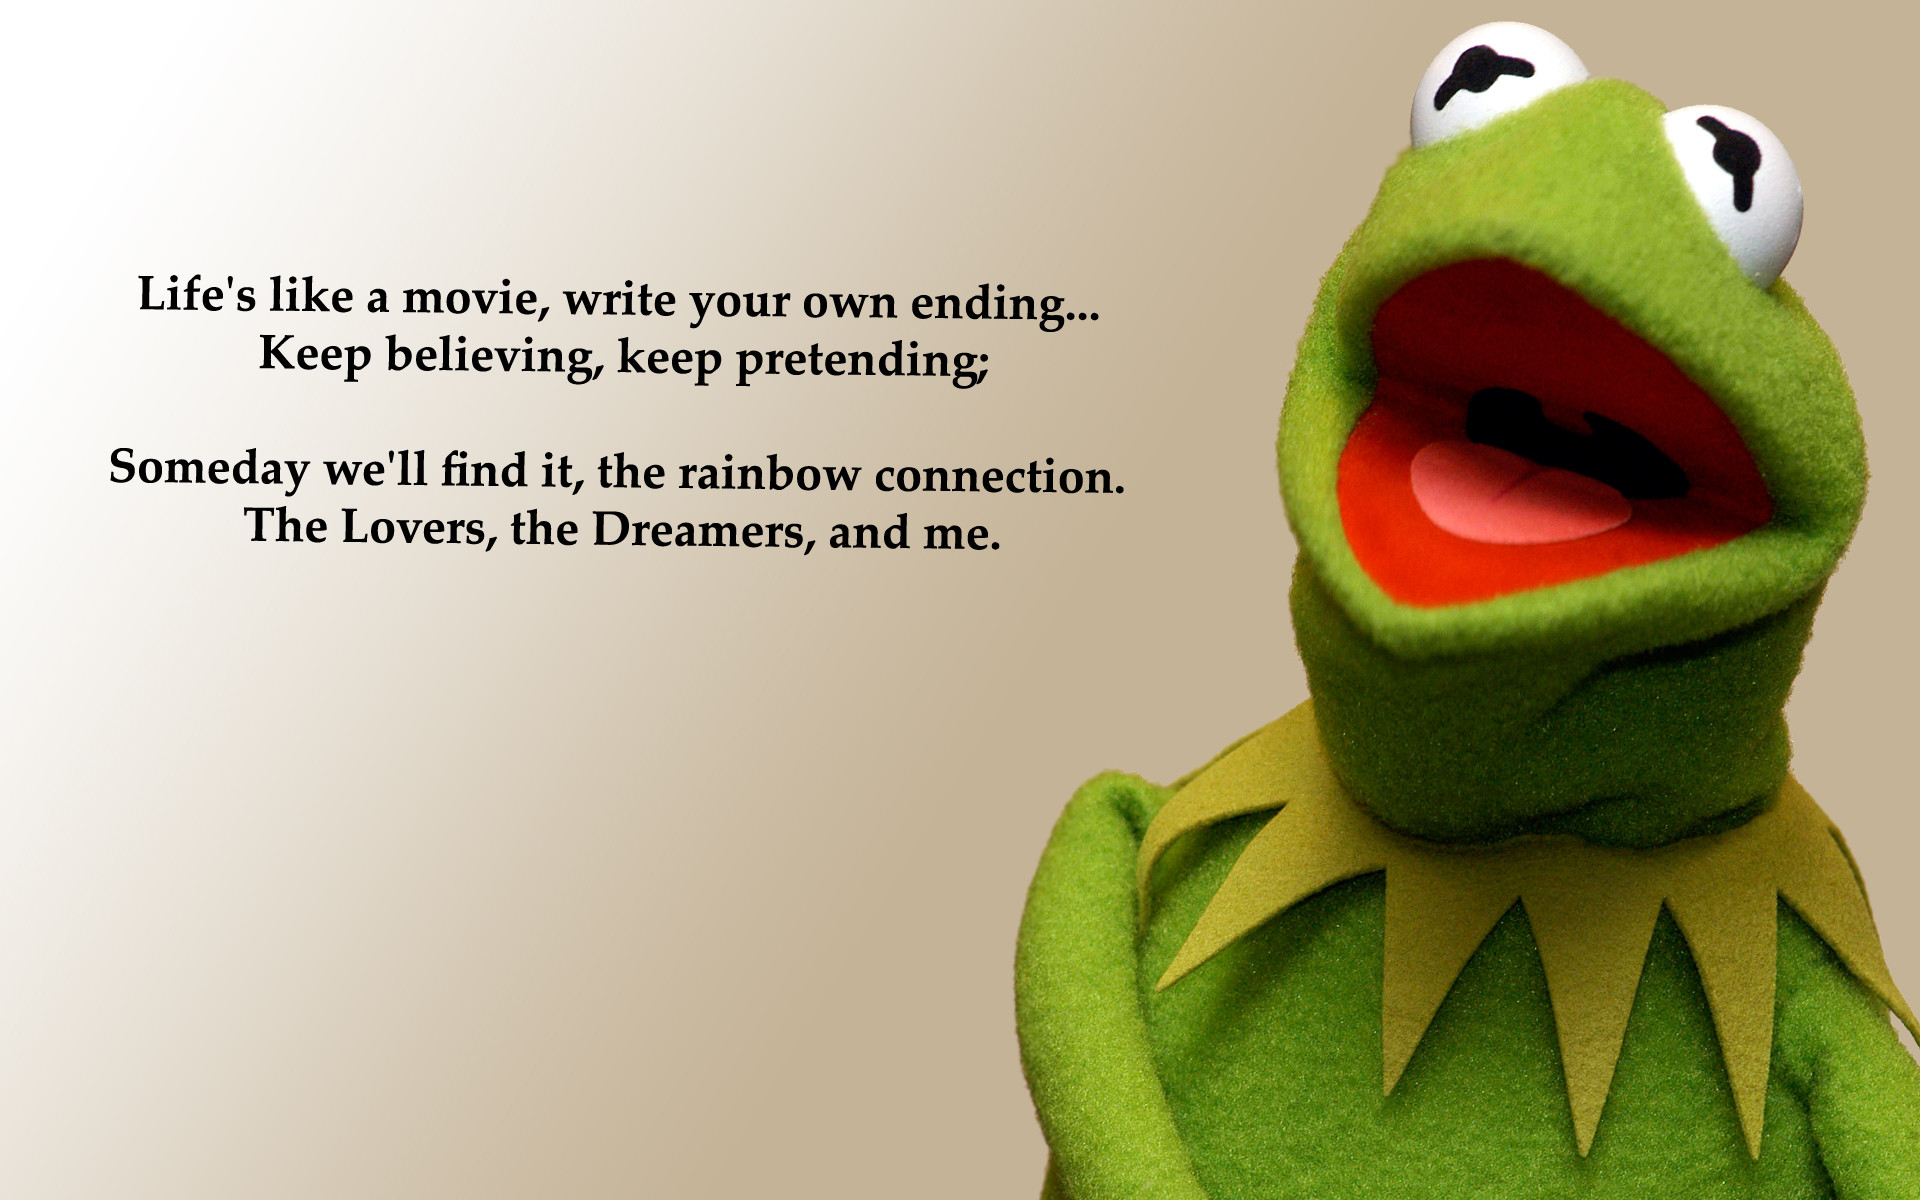 Kermit The Frog Quotes - Kermit The Frog Wallpaper Backgrounds , HD Wallpaper & Backgrounds